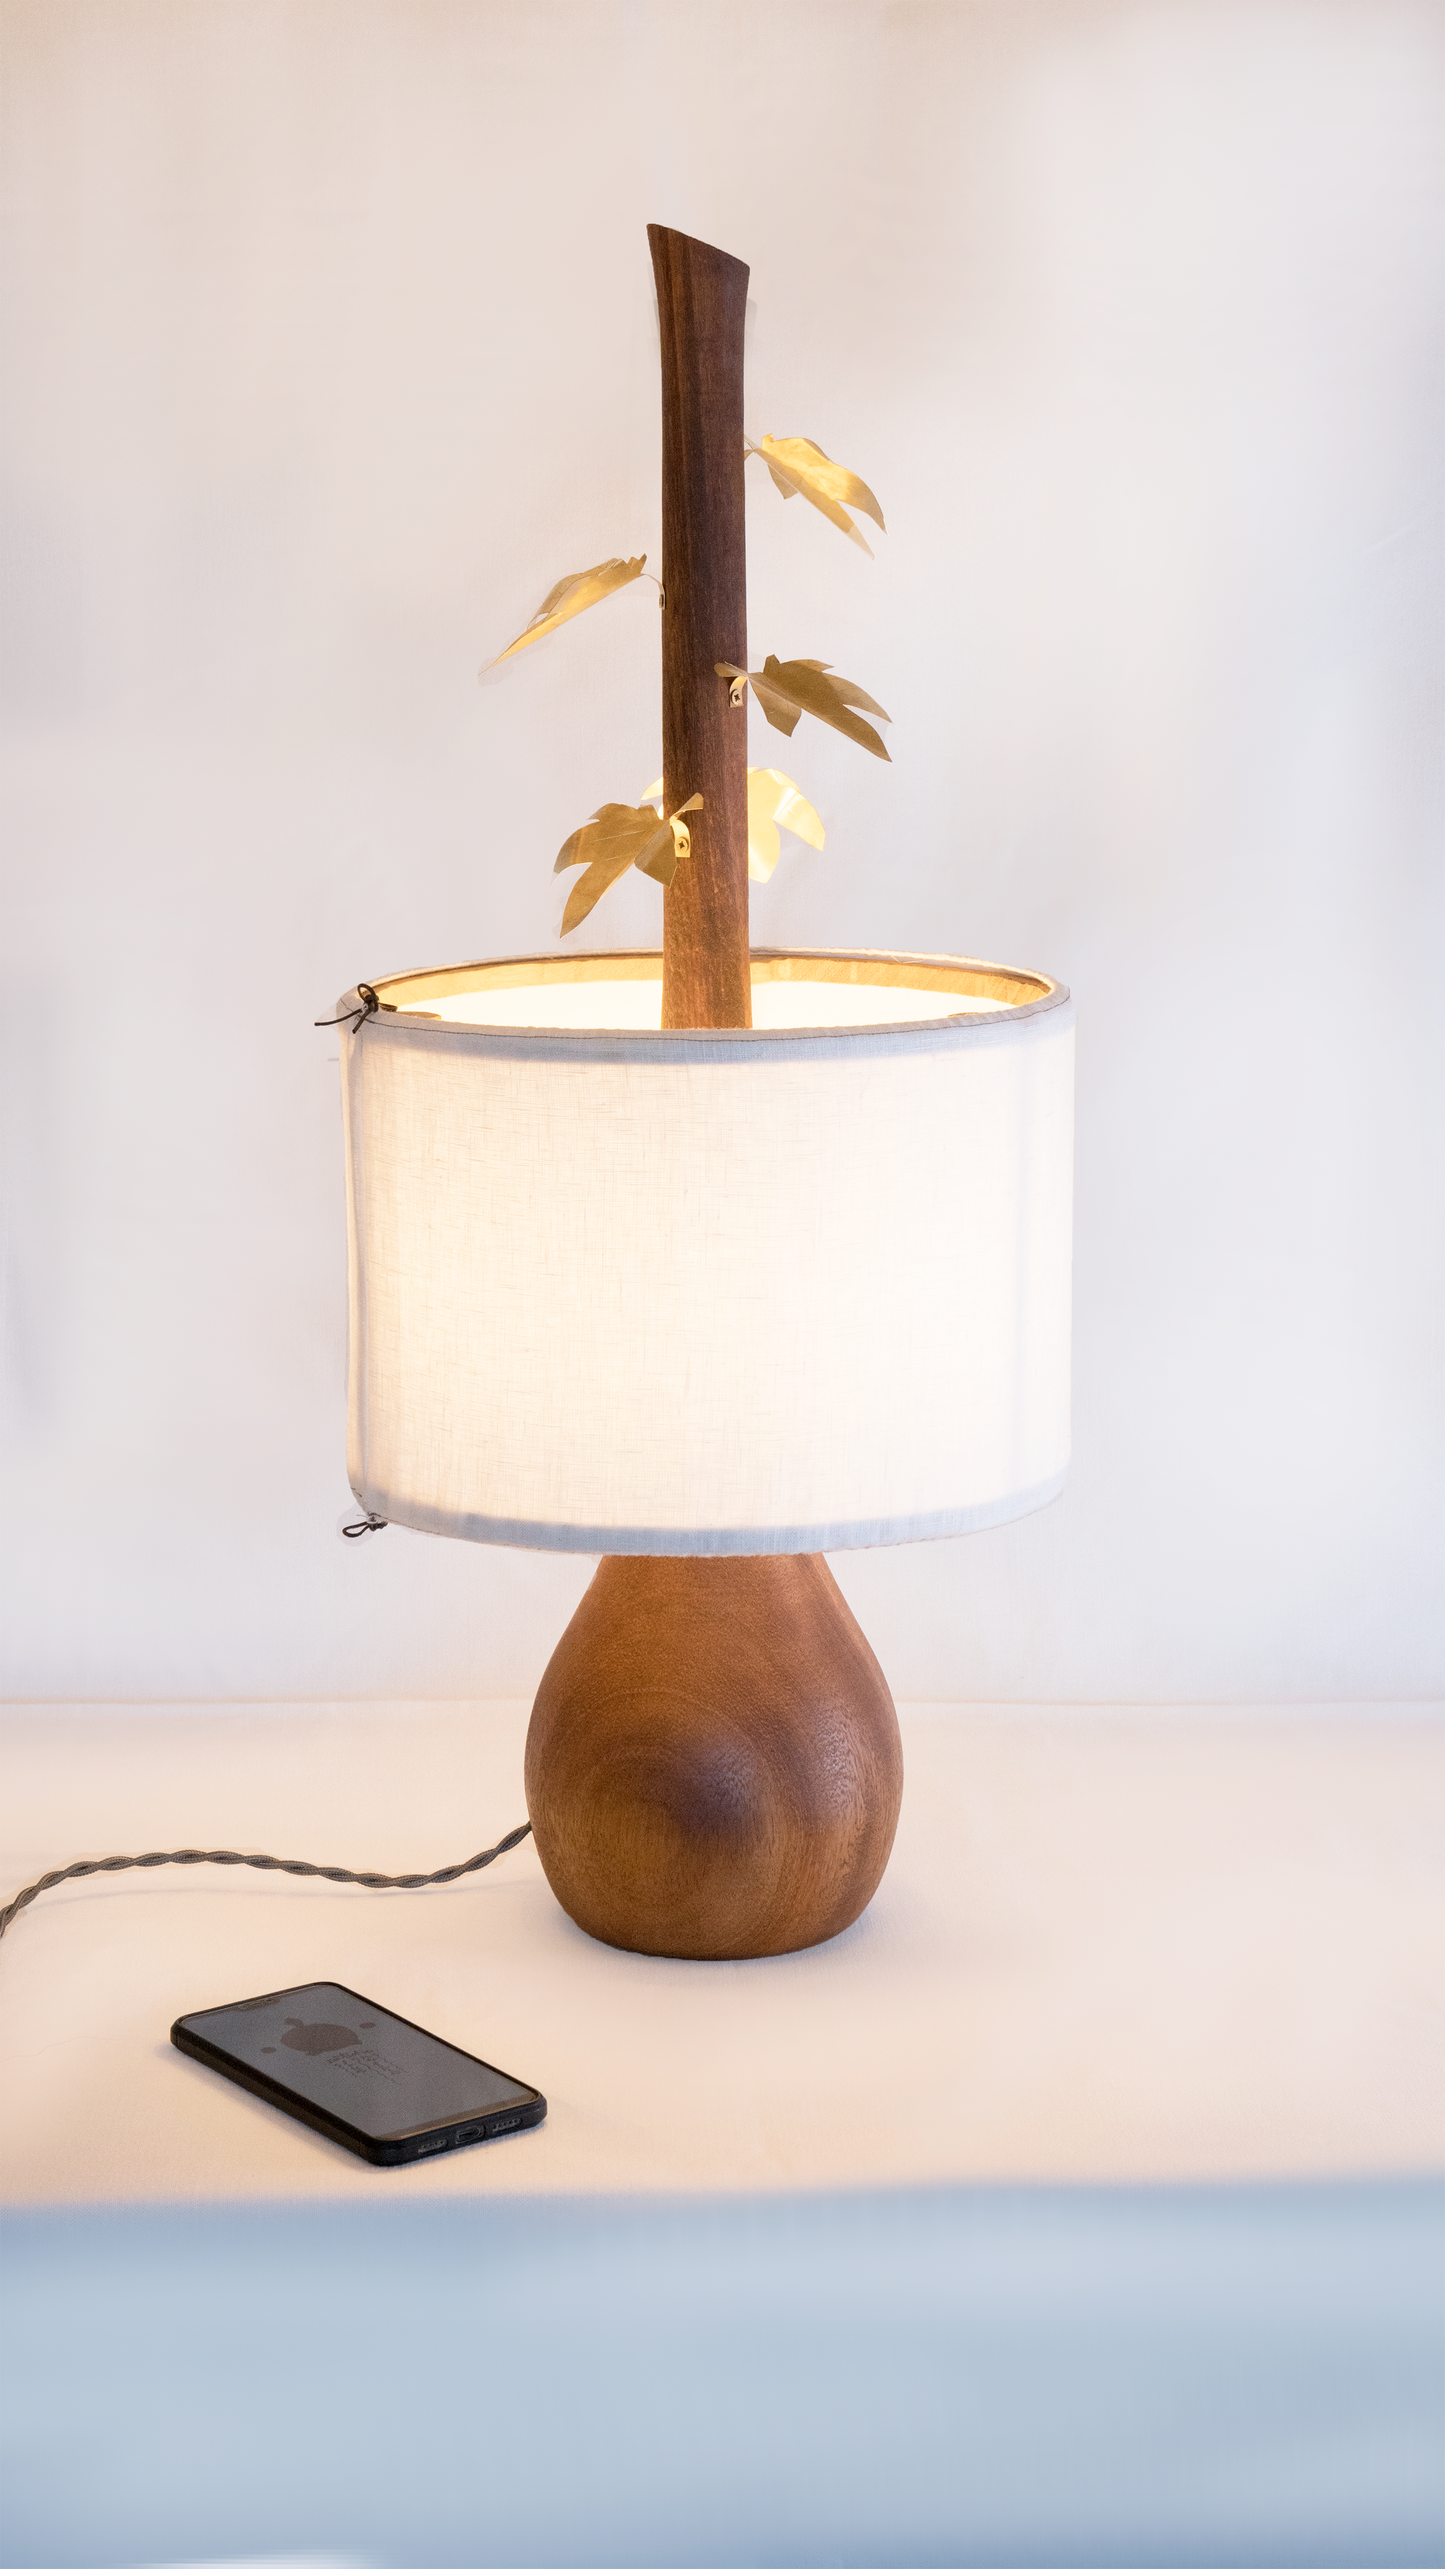 Wooden Table Lamp “Brote”